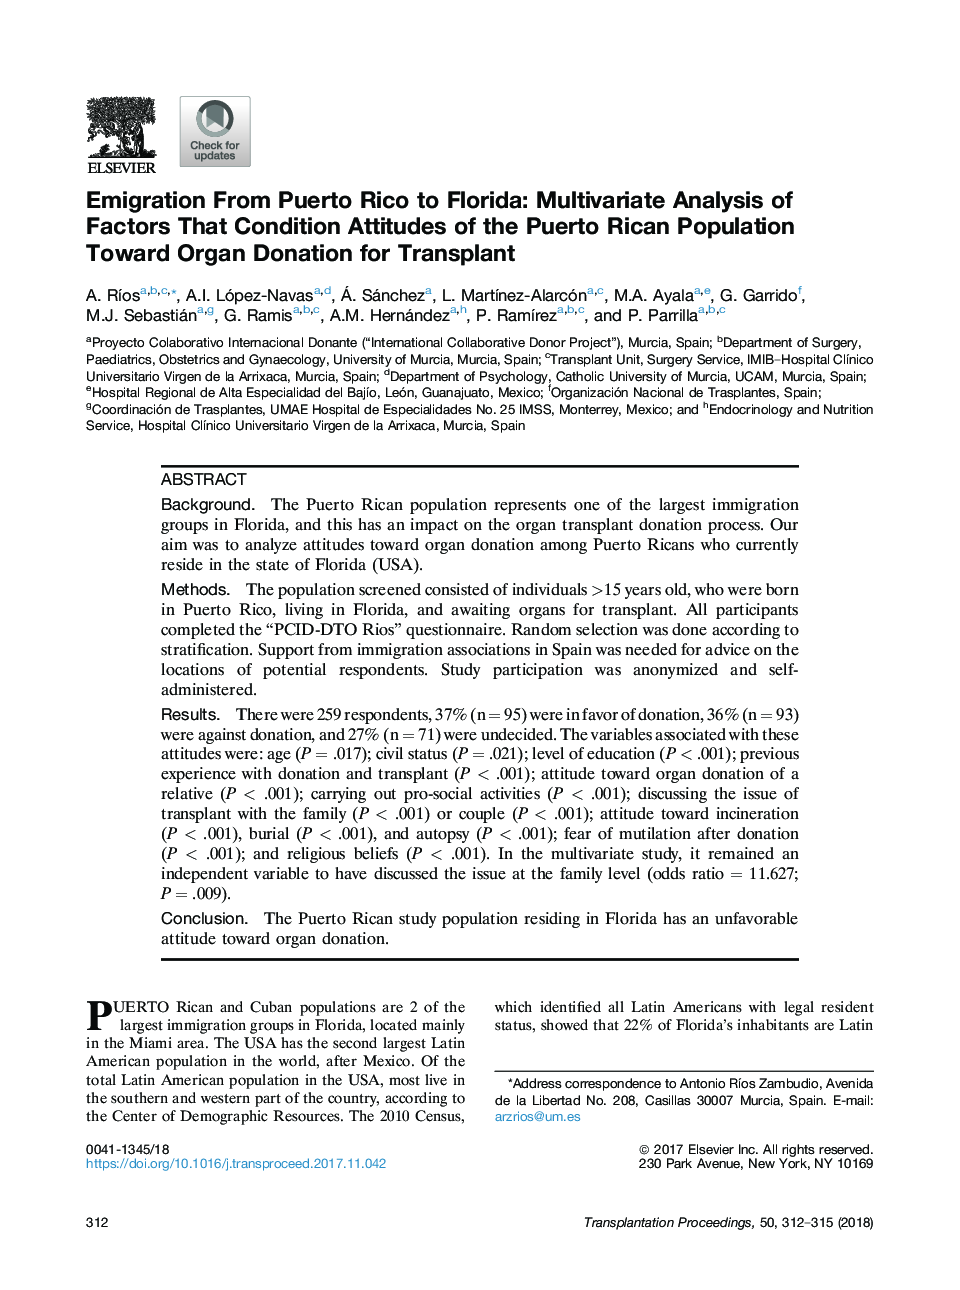 Emigration From Puerto Rico to Florida: Multivariate Analysis of Factors That Condition Attitudes of the Puerto Rican Population Toward Organ Donation for Transplant